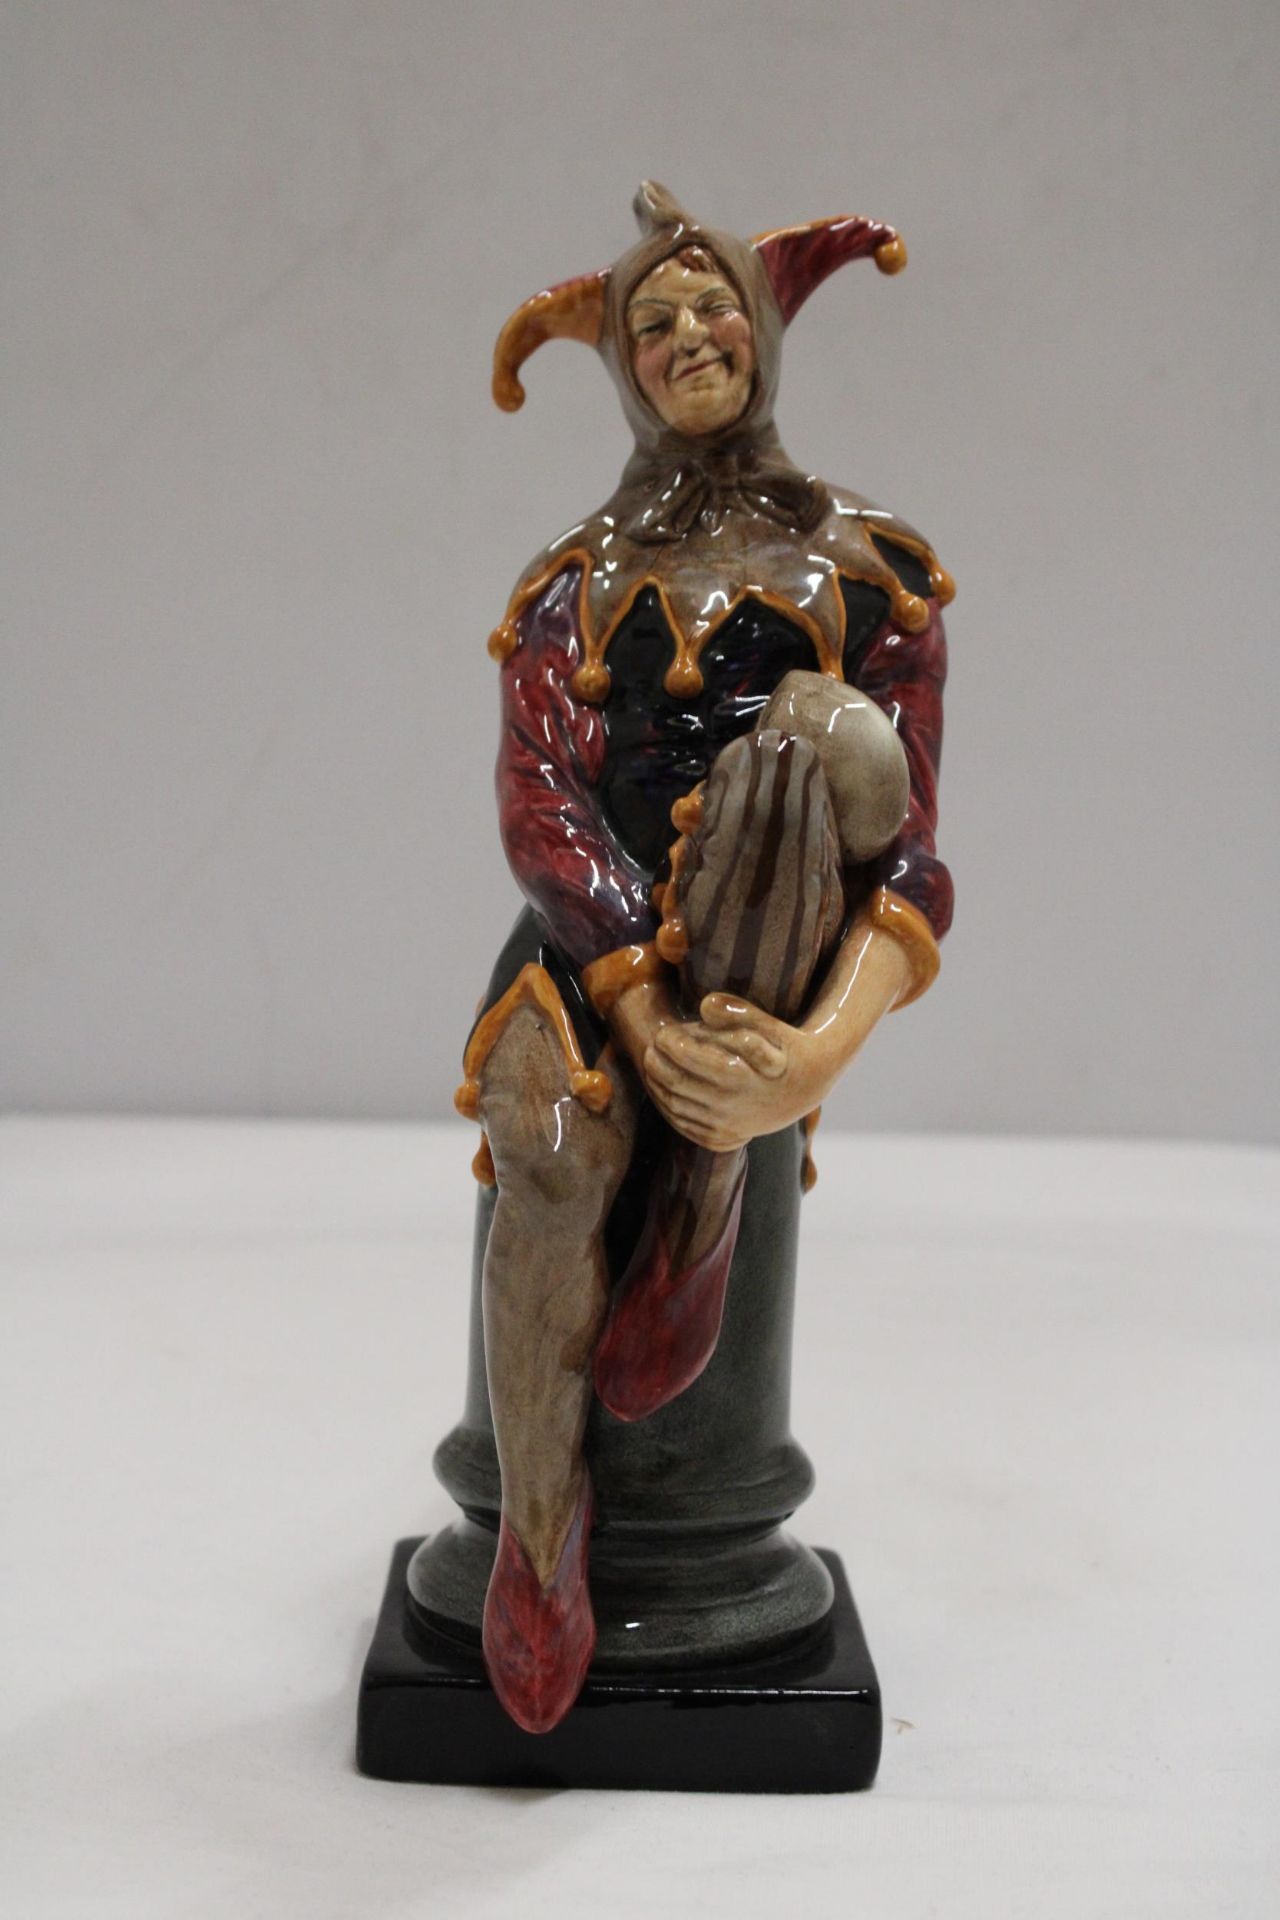 A ROYAL DOULTON FIGURE "THE JESTER" HN 2016 - Image 2 of 6